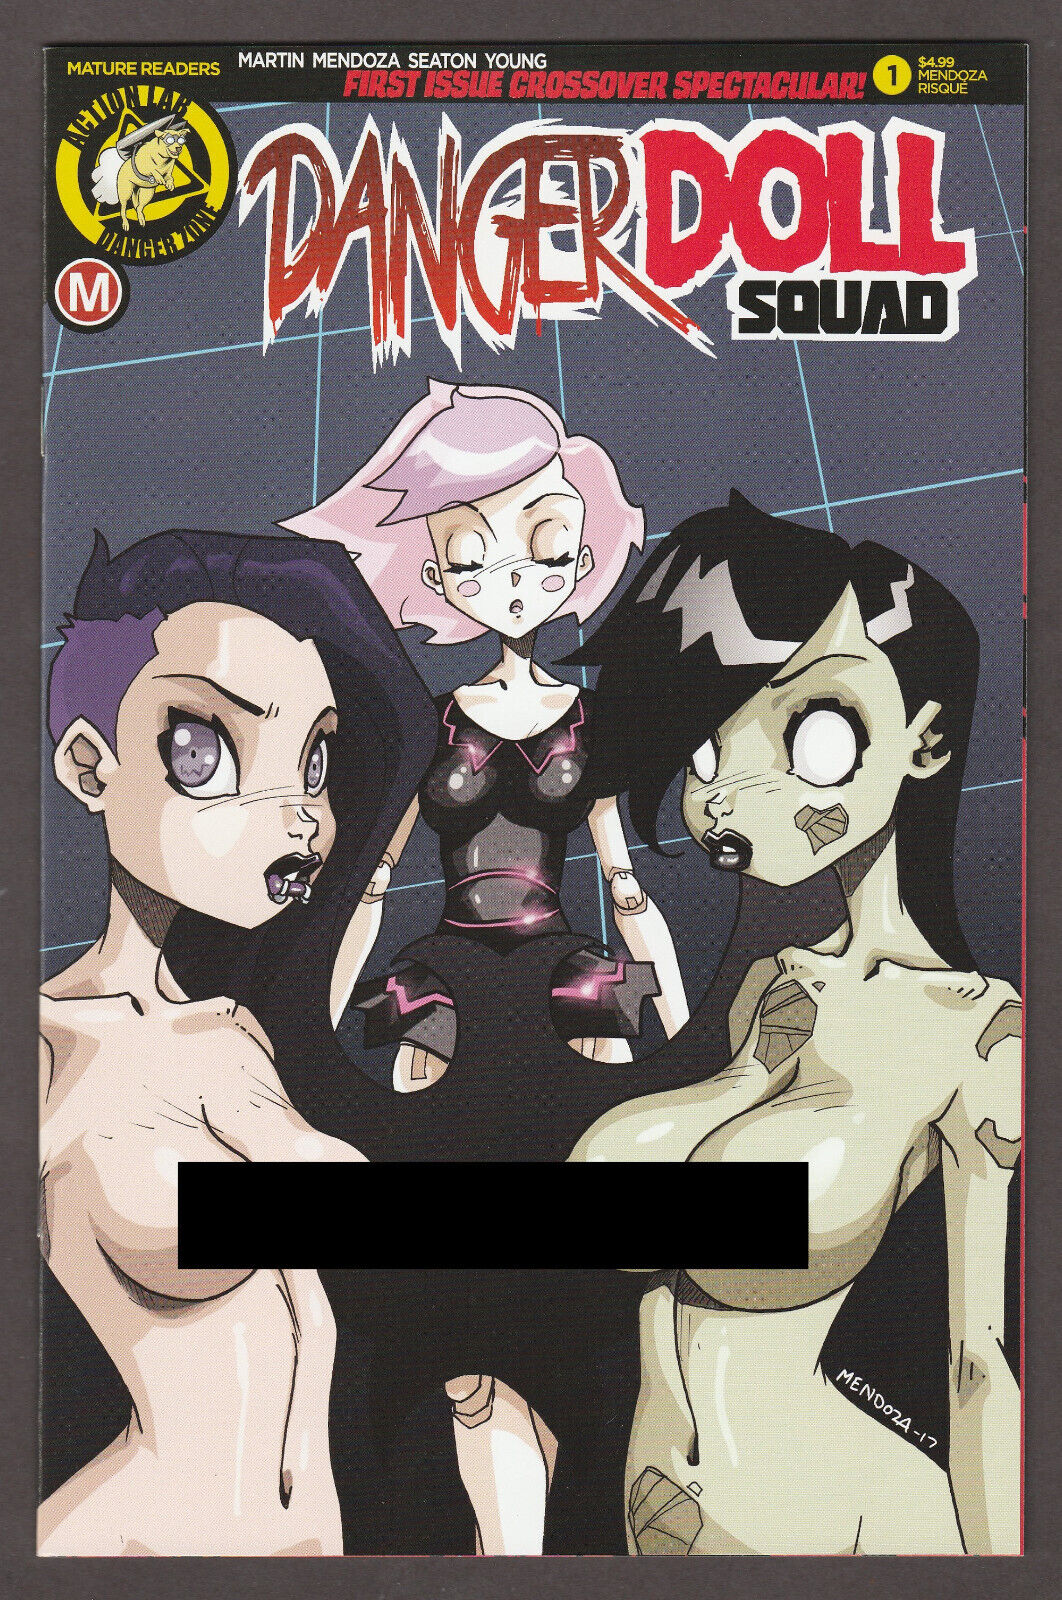 DANGER DOLL SQUAD #1D (2017) Limited to 2500 Risque' Variant- NEAR perfect (9.8)